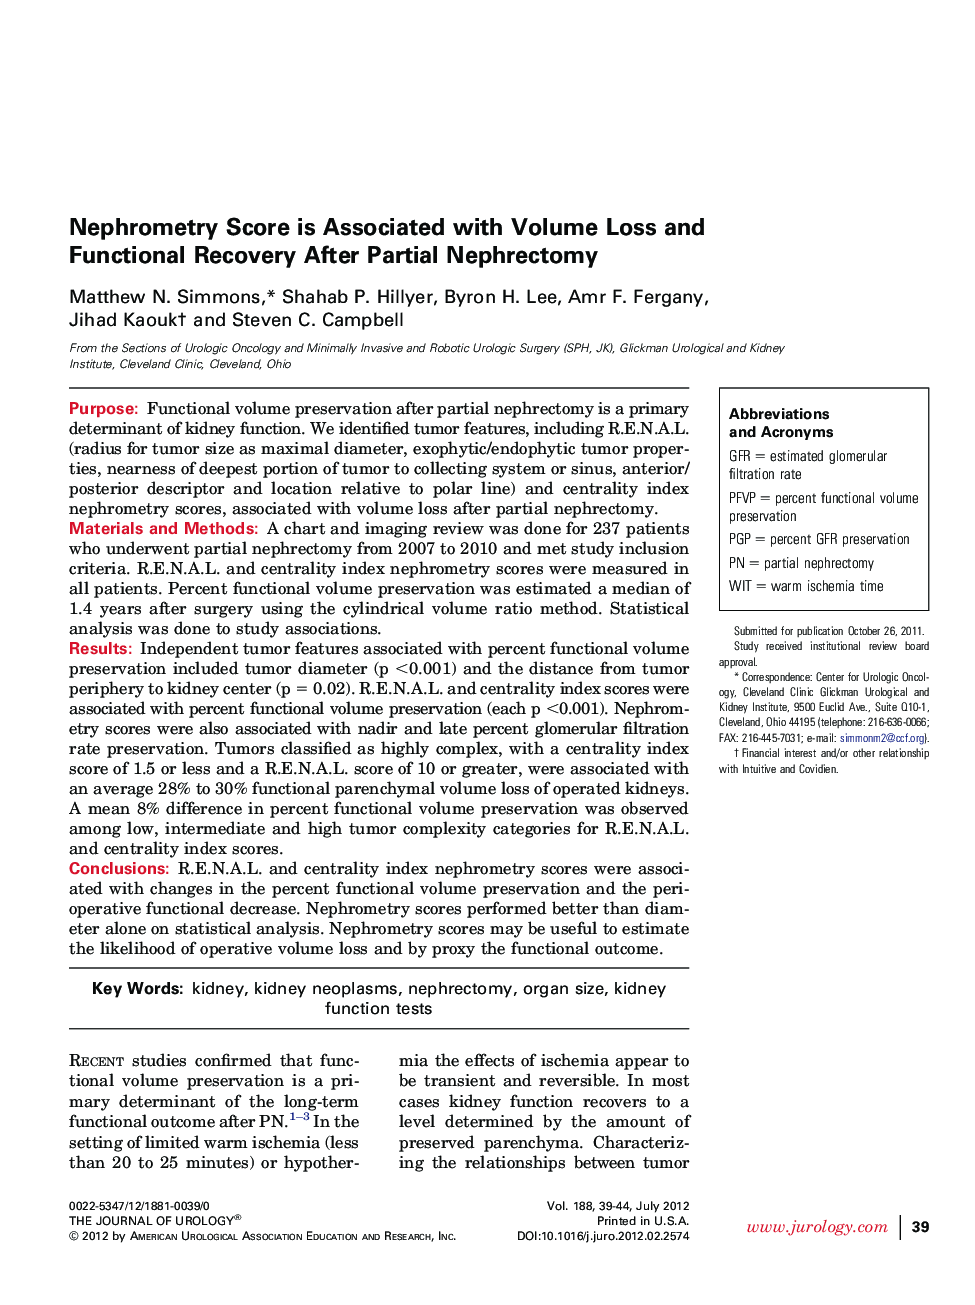 Nephrometry Score is Associated with Volume Loss and Functional Recovery After Partial Nephrectomy 